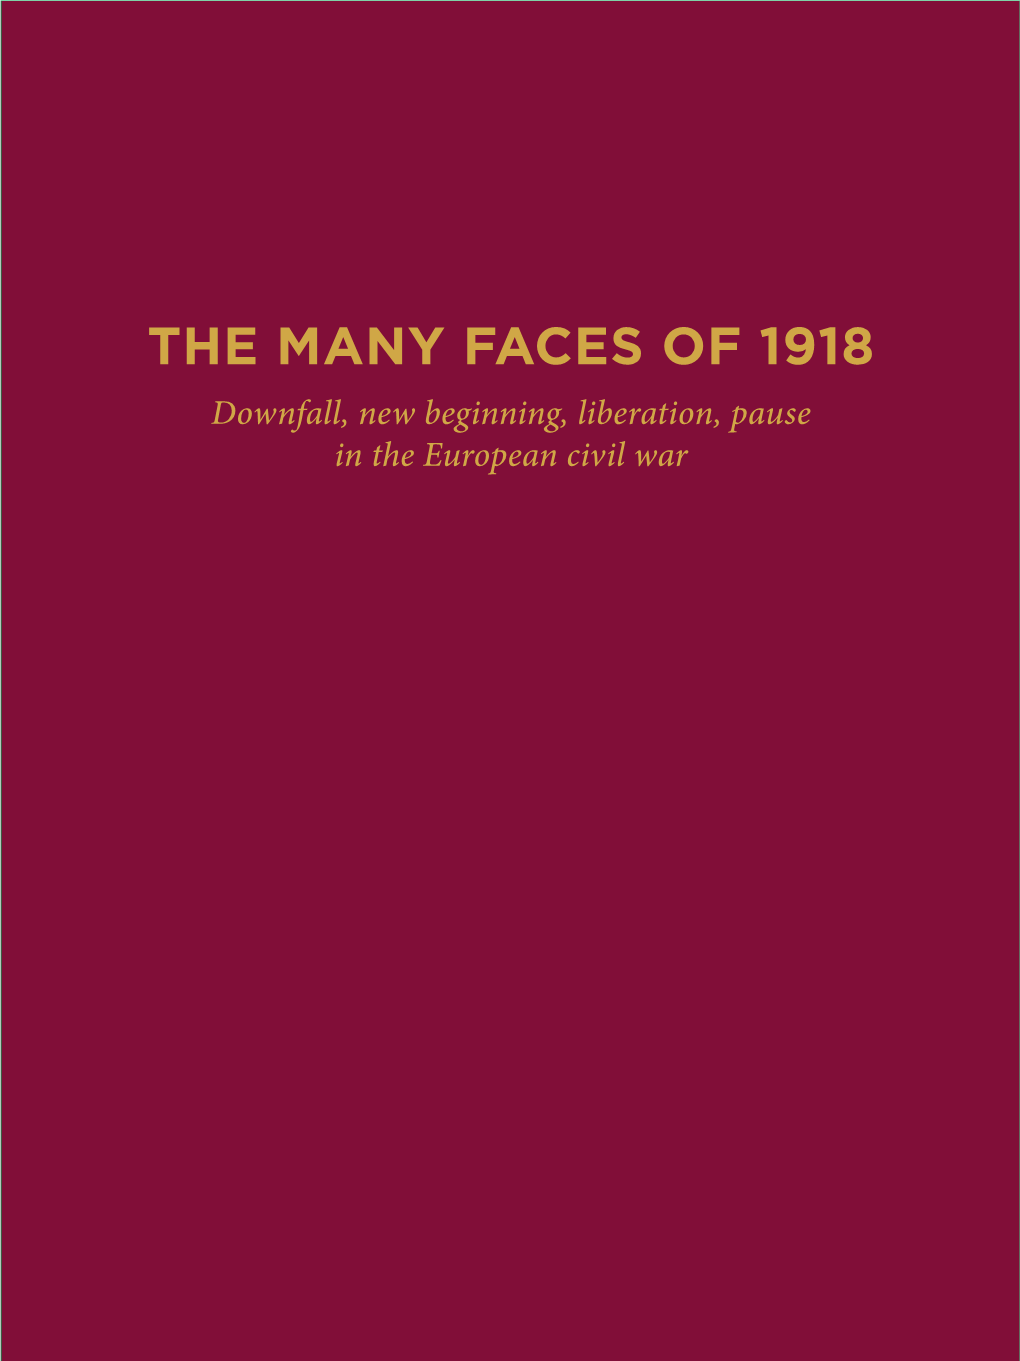 The Many Faces of 1918